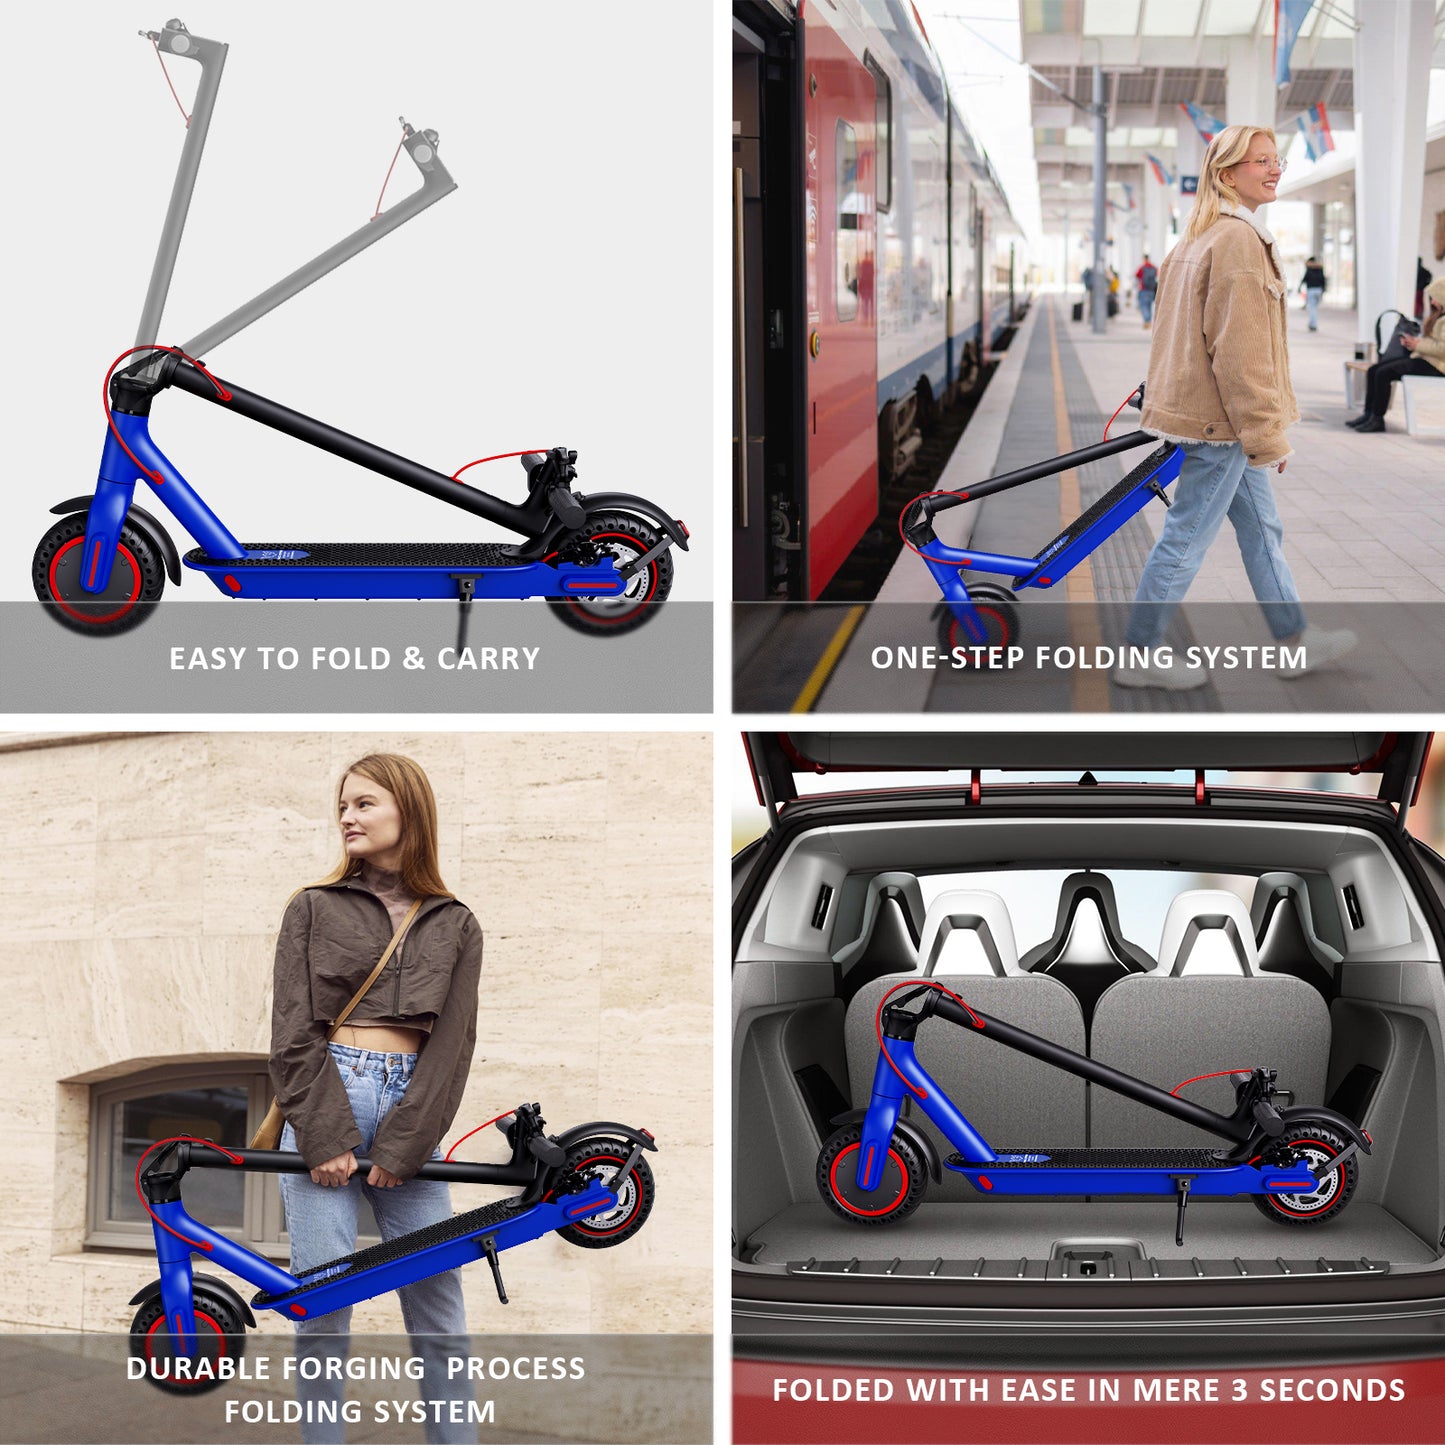 WINDHORSE Electric Scooter, 350W Motor Electric KickScooter, 15-20 Miles Range & 15.5 MPH Foldable Electric Scooter, 8.5" Solid Tire Cruise Control Disk Brake Commuter E-Scooter for Adults, T1